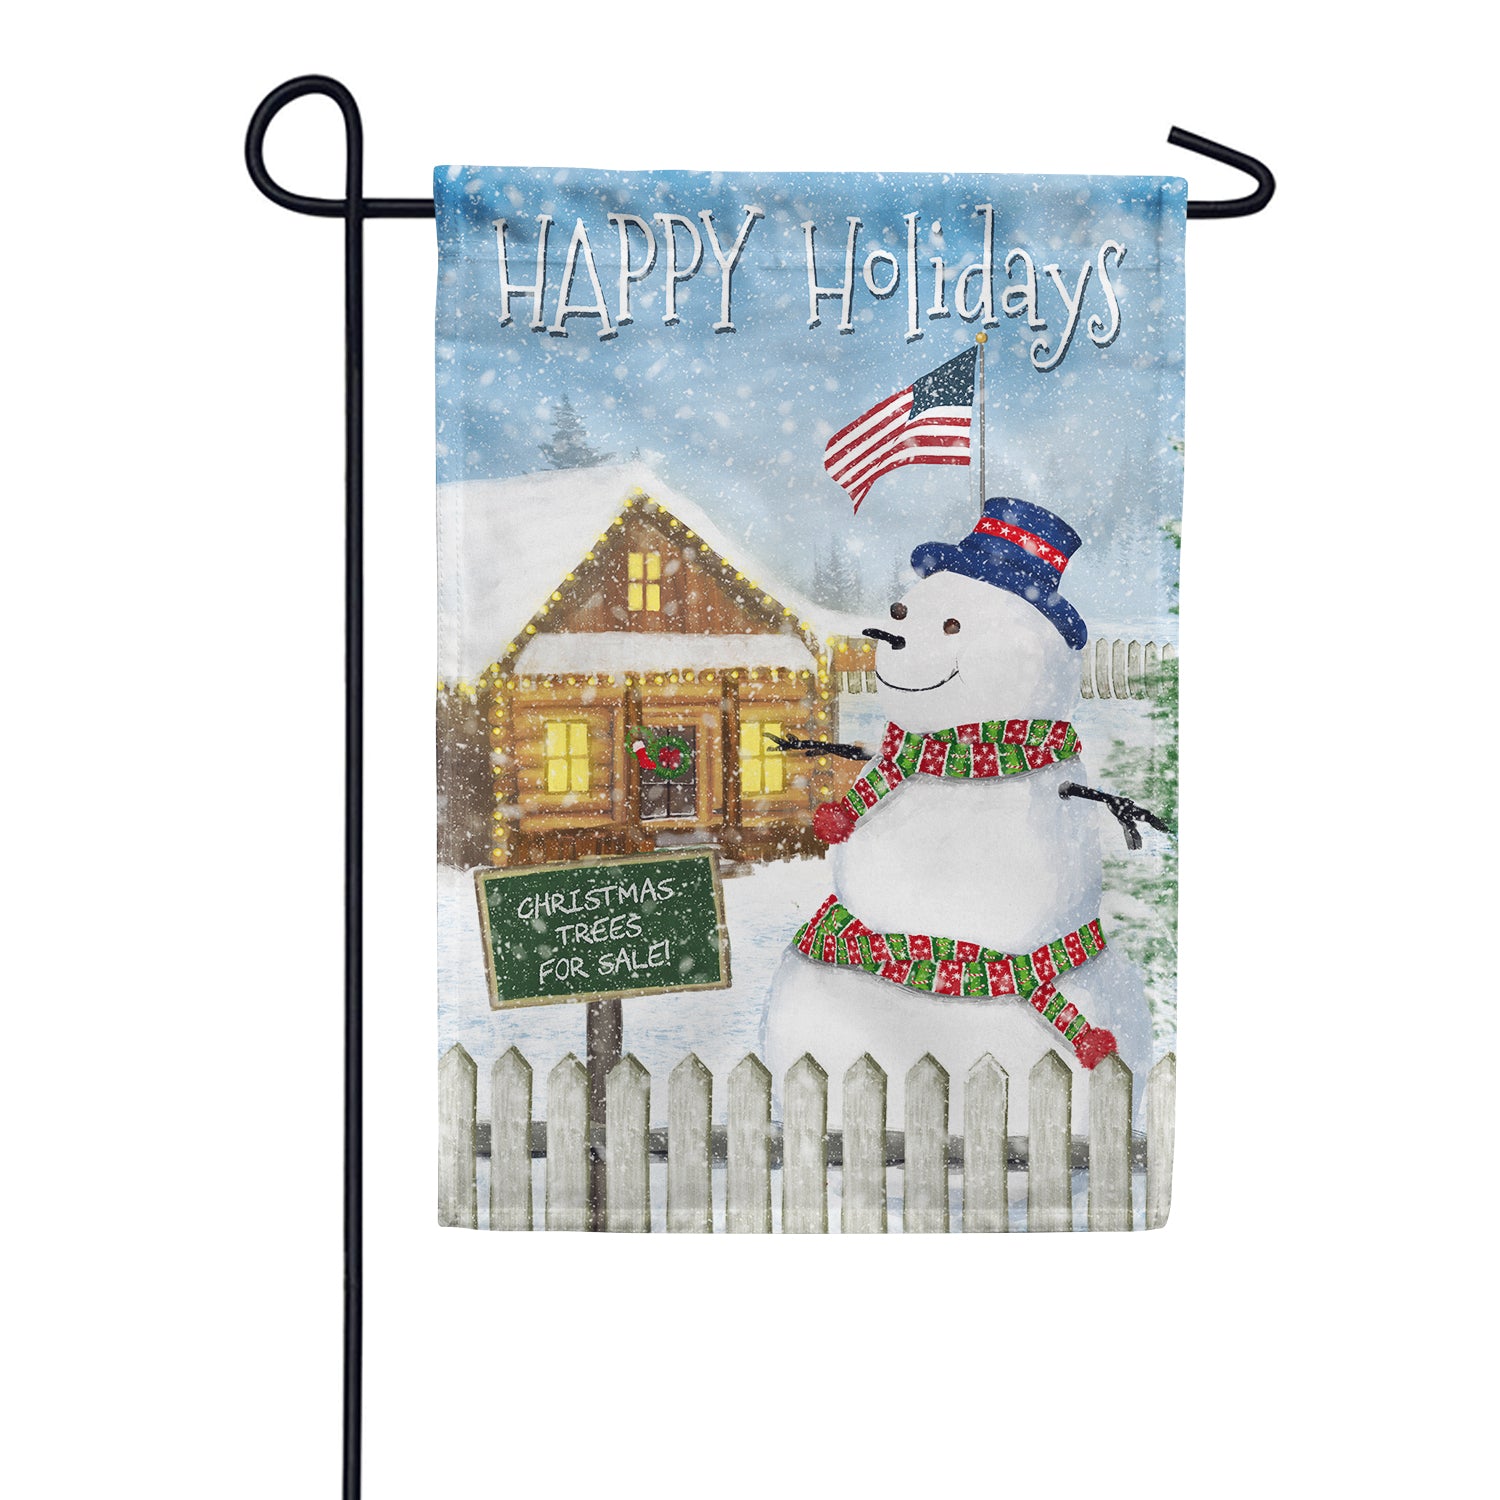 Christmas Trees for Sale Double Sided Garden Flag